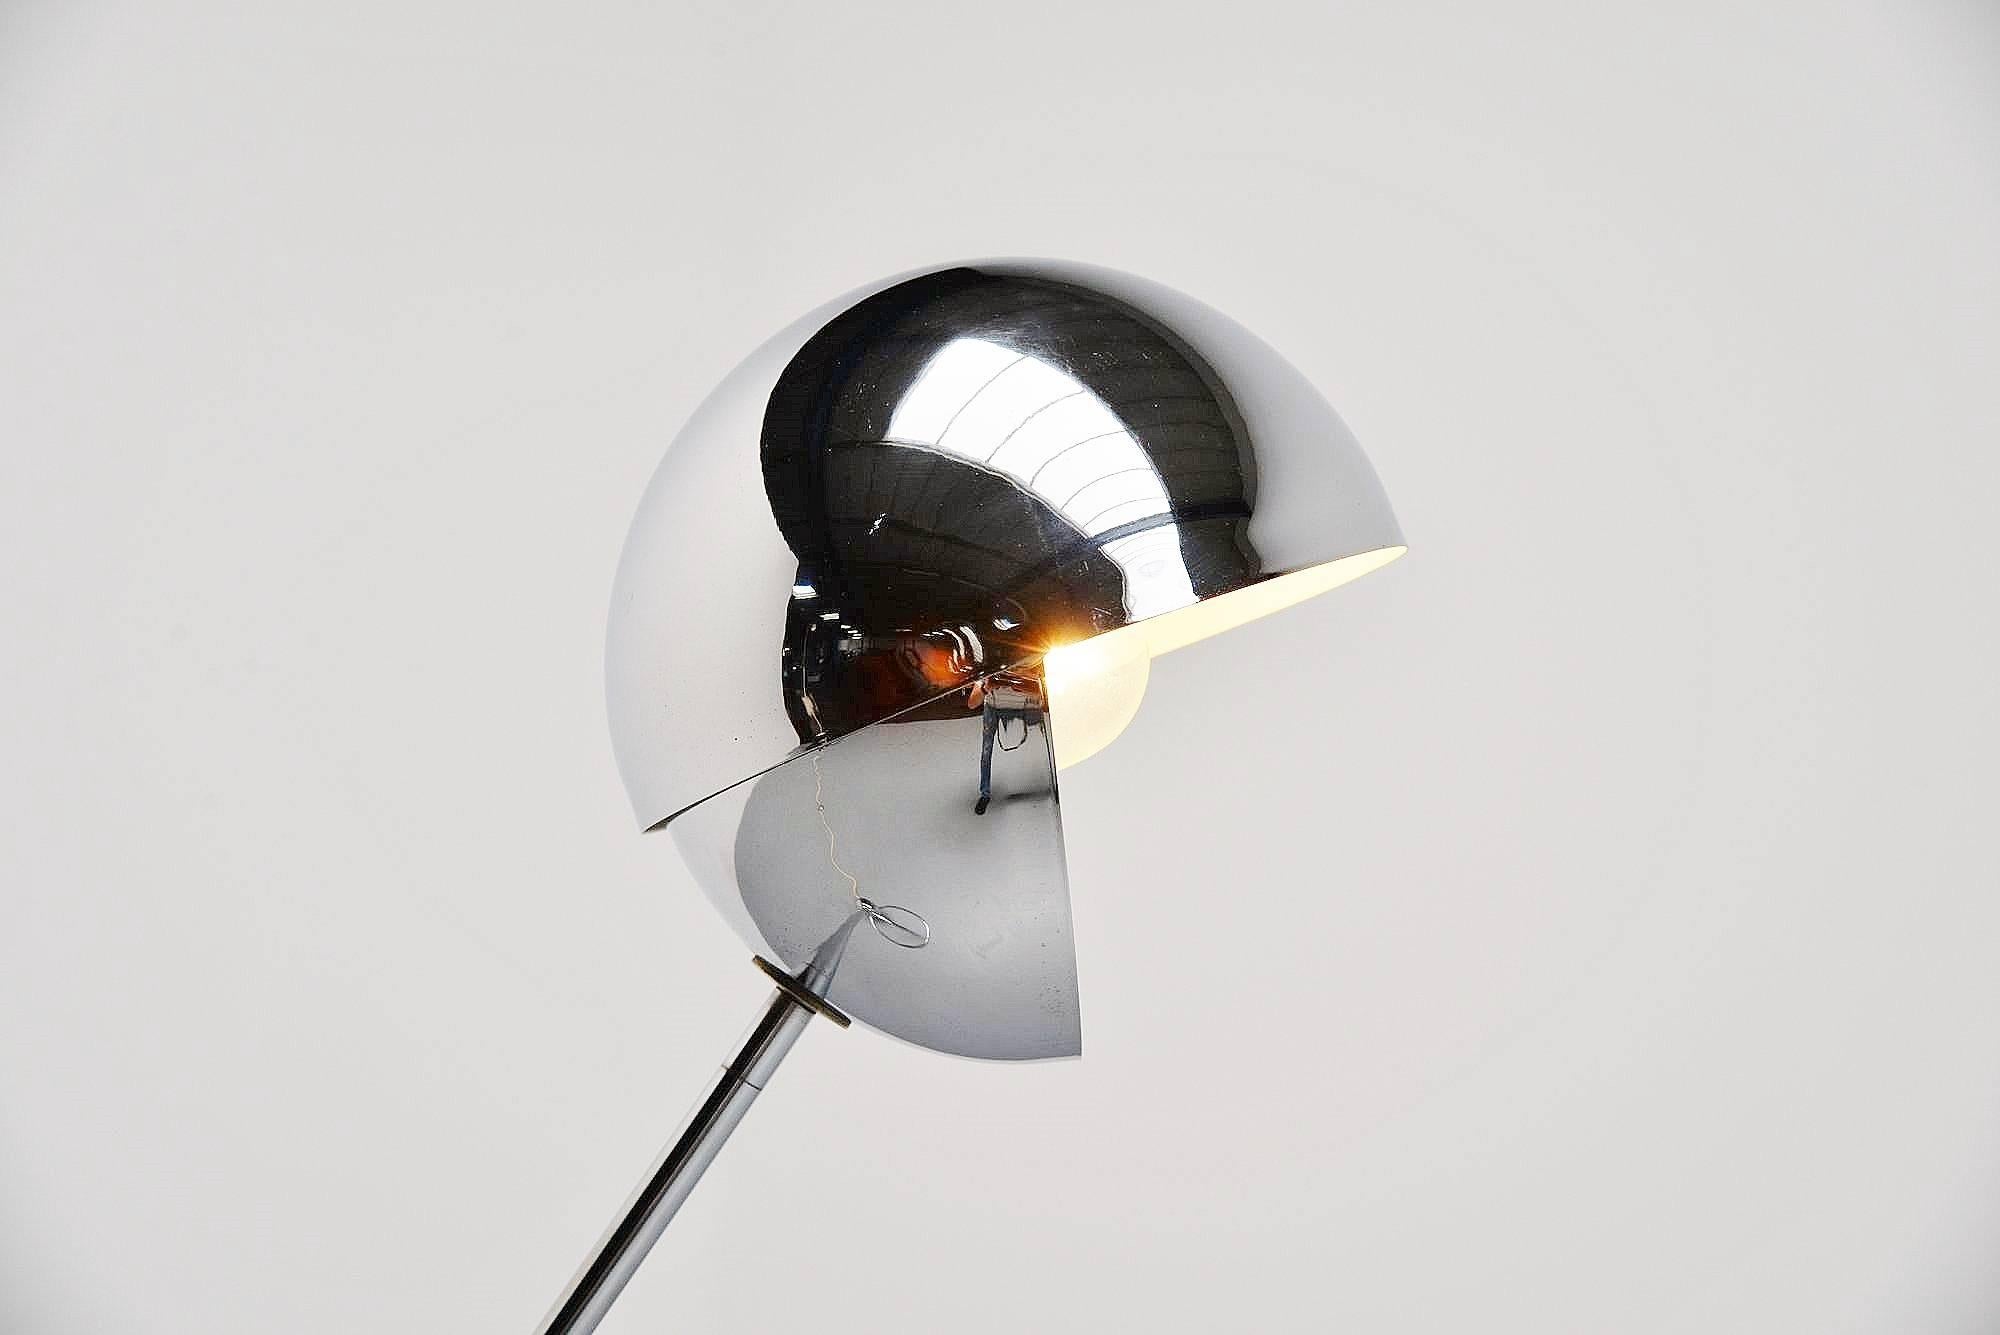 Adjustable floor lamp mode S3 designed by Paolo Tilche for Sirrah, Italy, 1972. This floor lamp has a round counter weight that creates perfect balance to adjust it. The shade swivels and creates a very nice spherical light when changed in different